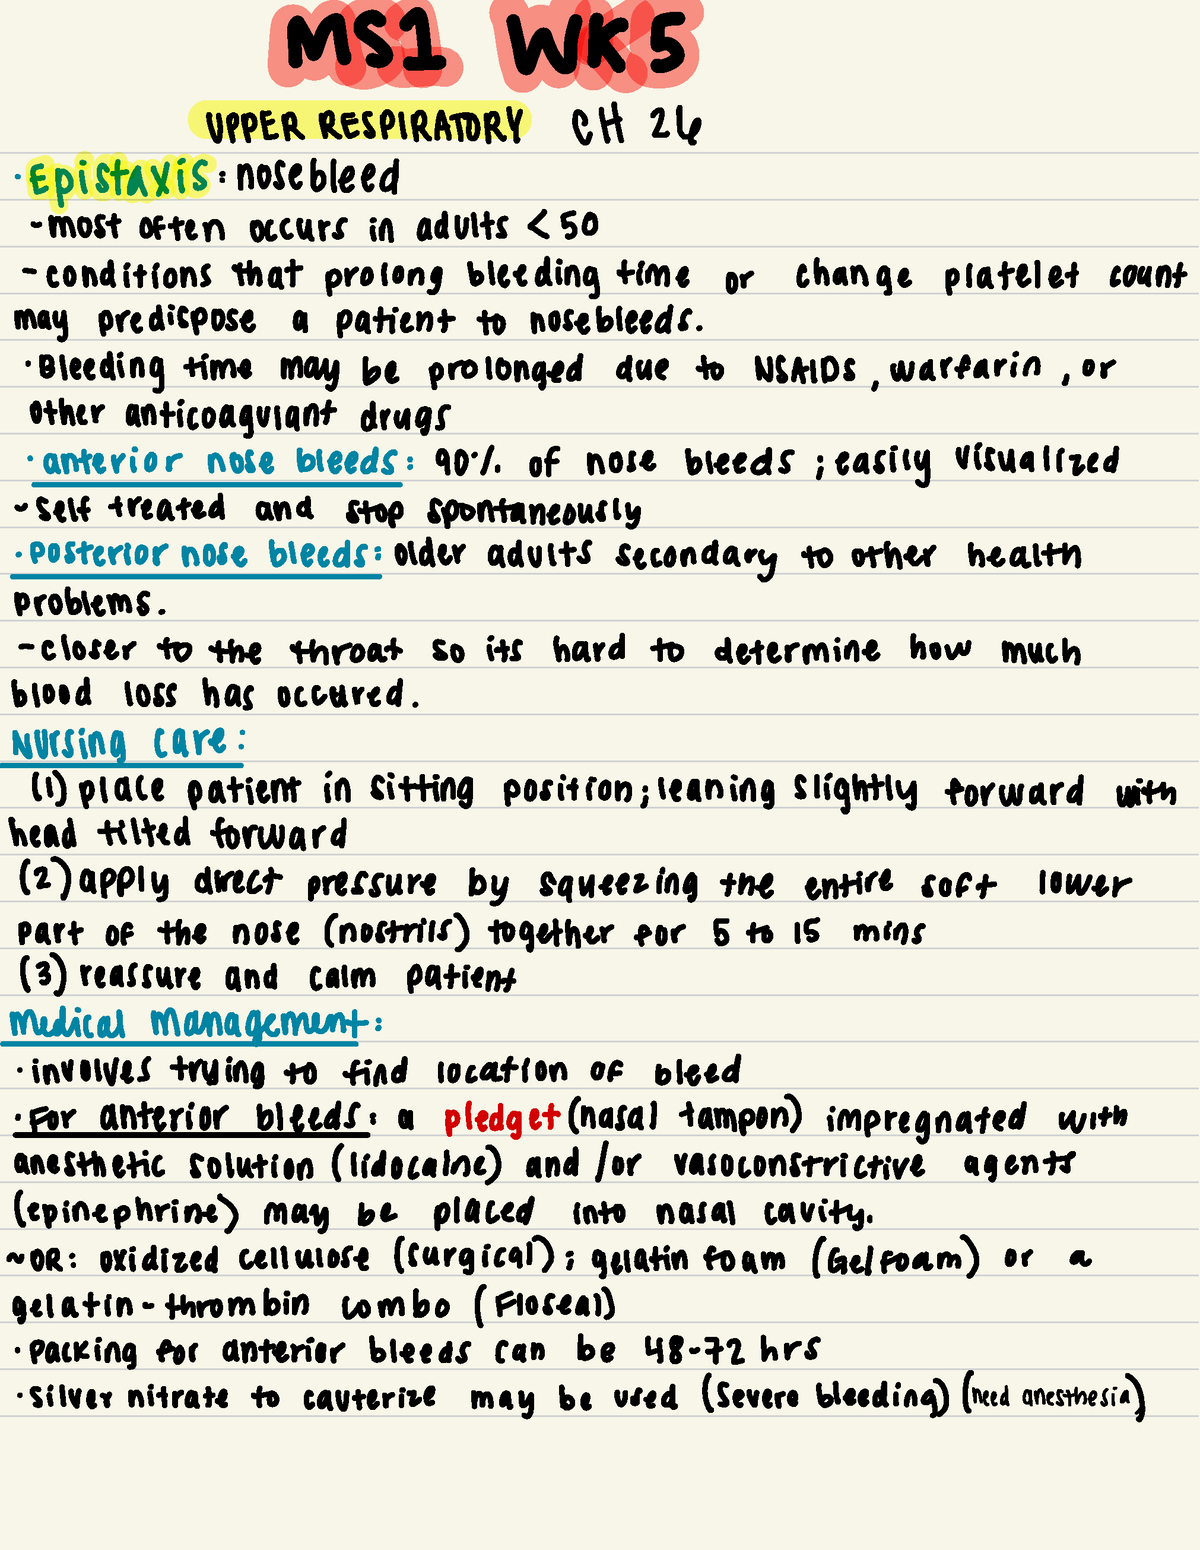 MS1 WK 5 - Lecture notes week 5 - ####### MSI ####### Wk 5 UPPER ...